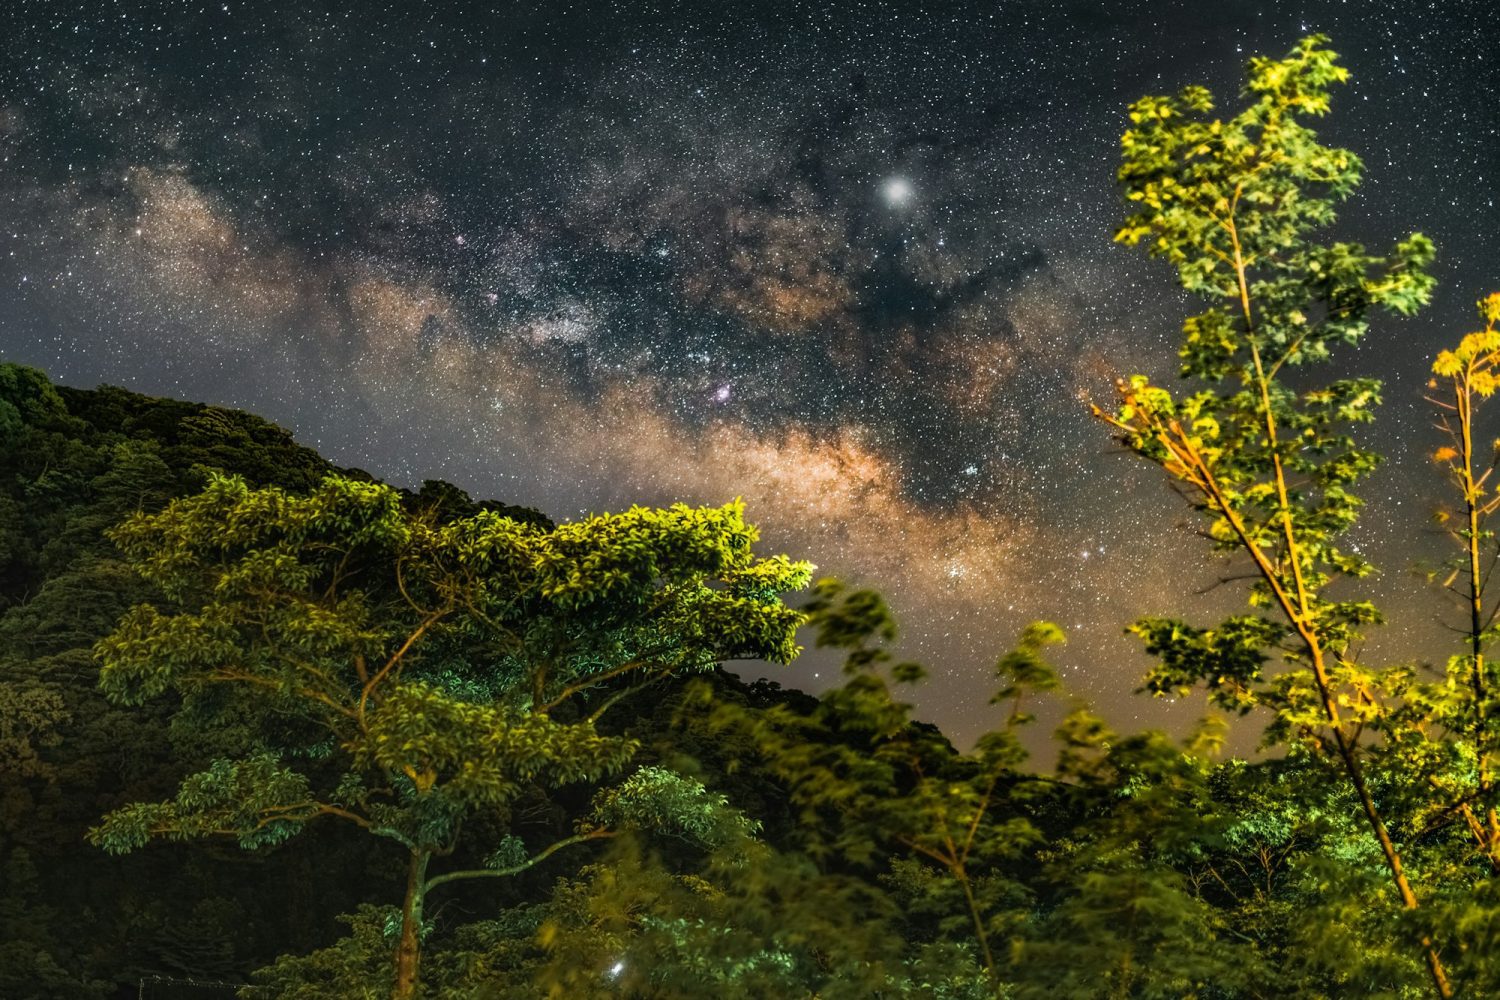 Beautiful scenery of a starry night with Milky Way Galaxy over a landscape